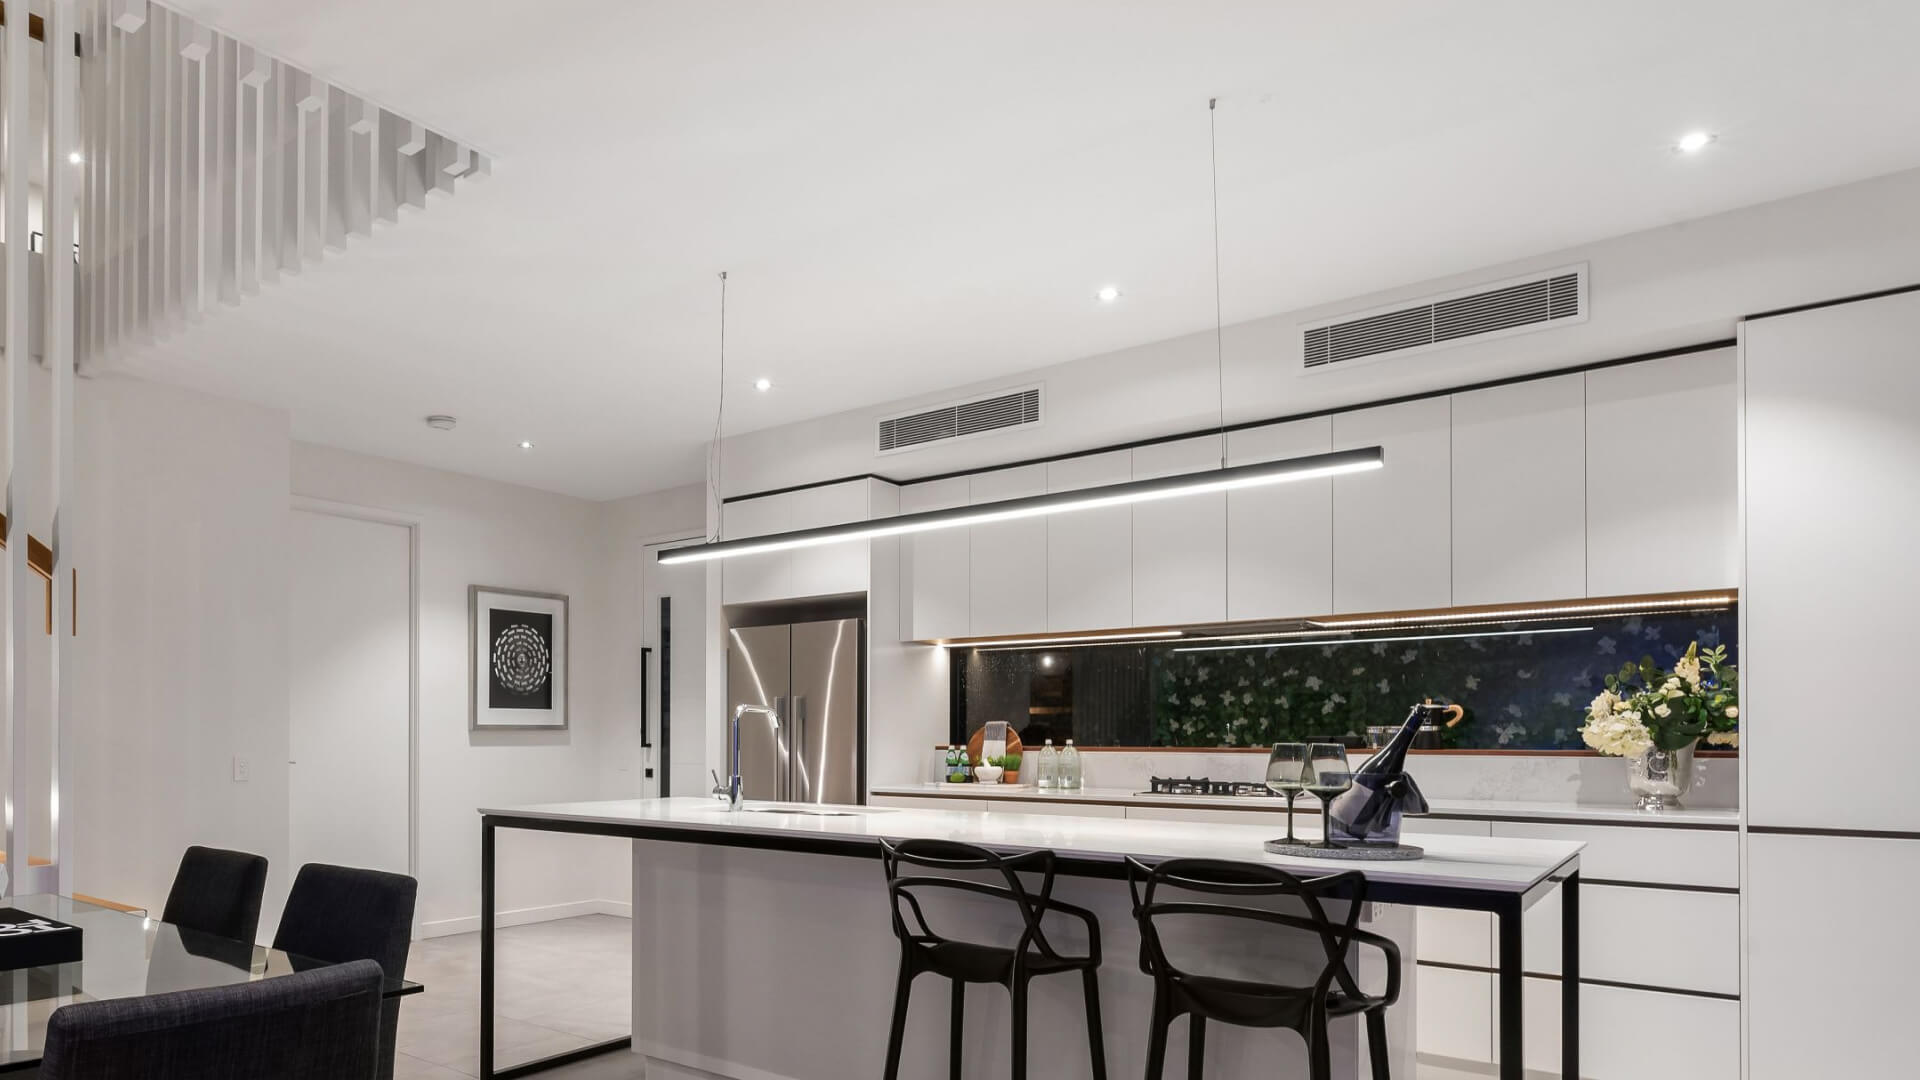 A modern kitchen on the Sunshine Coast with ducted air conditioner.